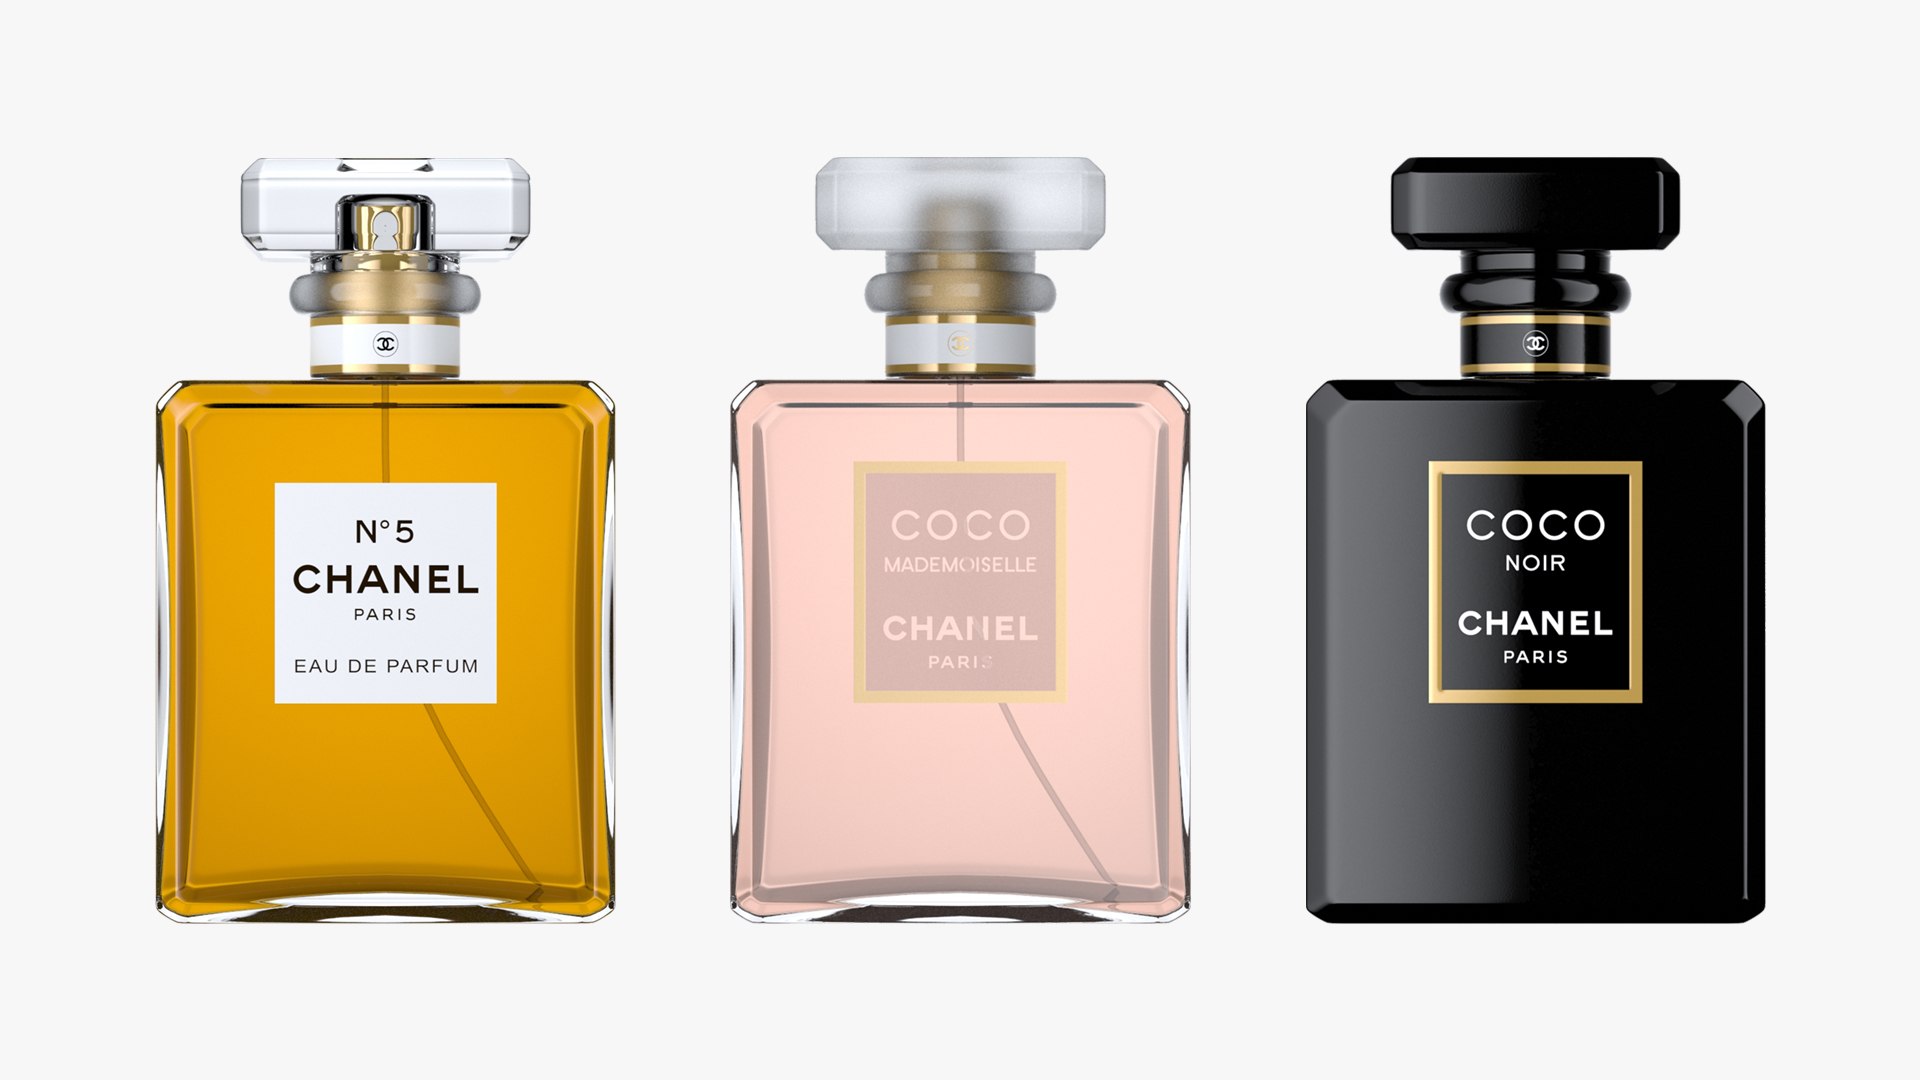 Sold at Auction: Chanel, 4 Chanel Perfume Bottles